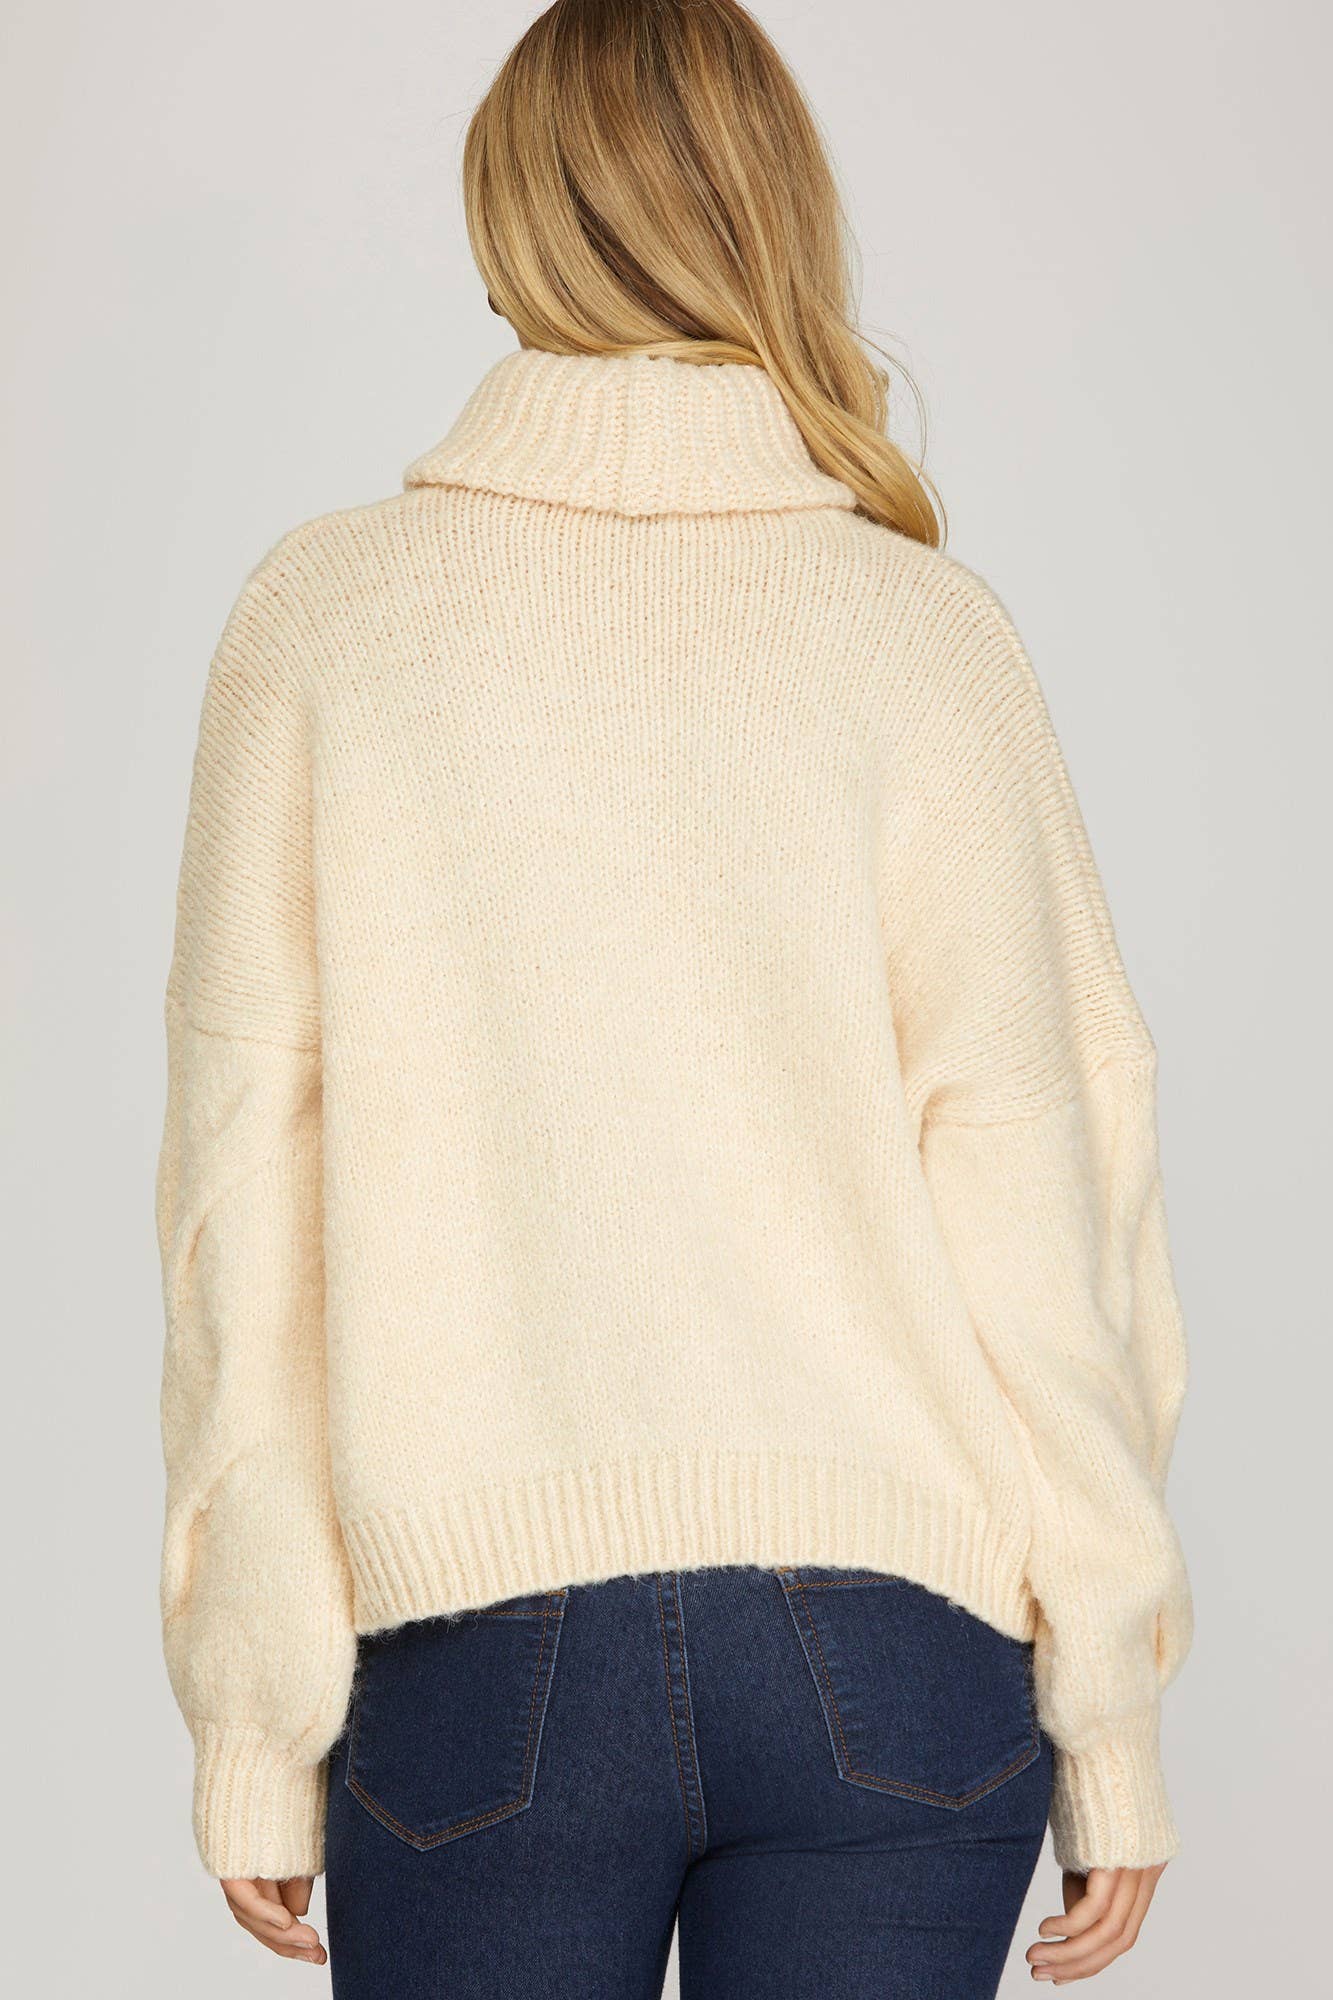 LONG SLEEVE TURTLENECK CABLE KNIT SWEATER TOP: S / CREAM